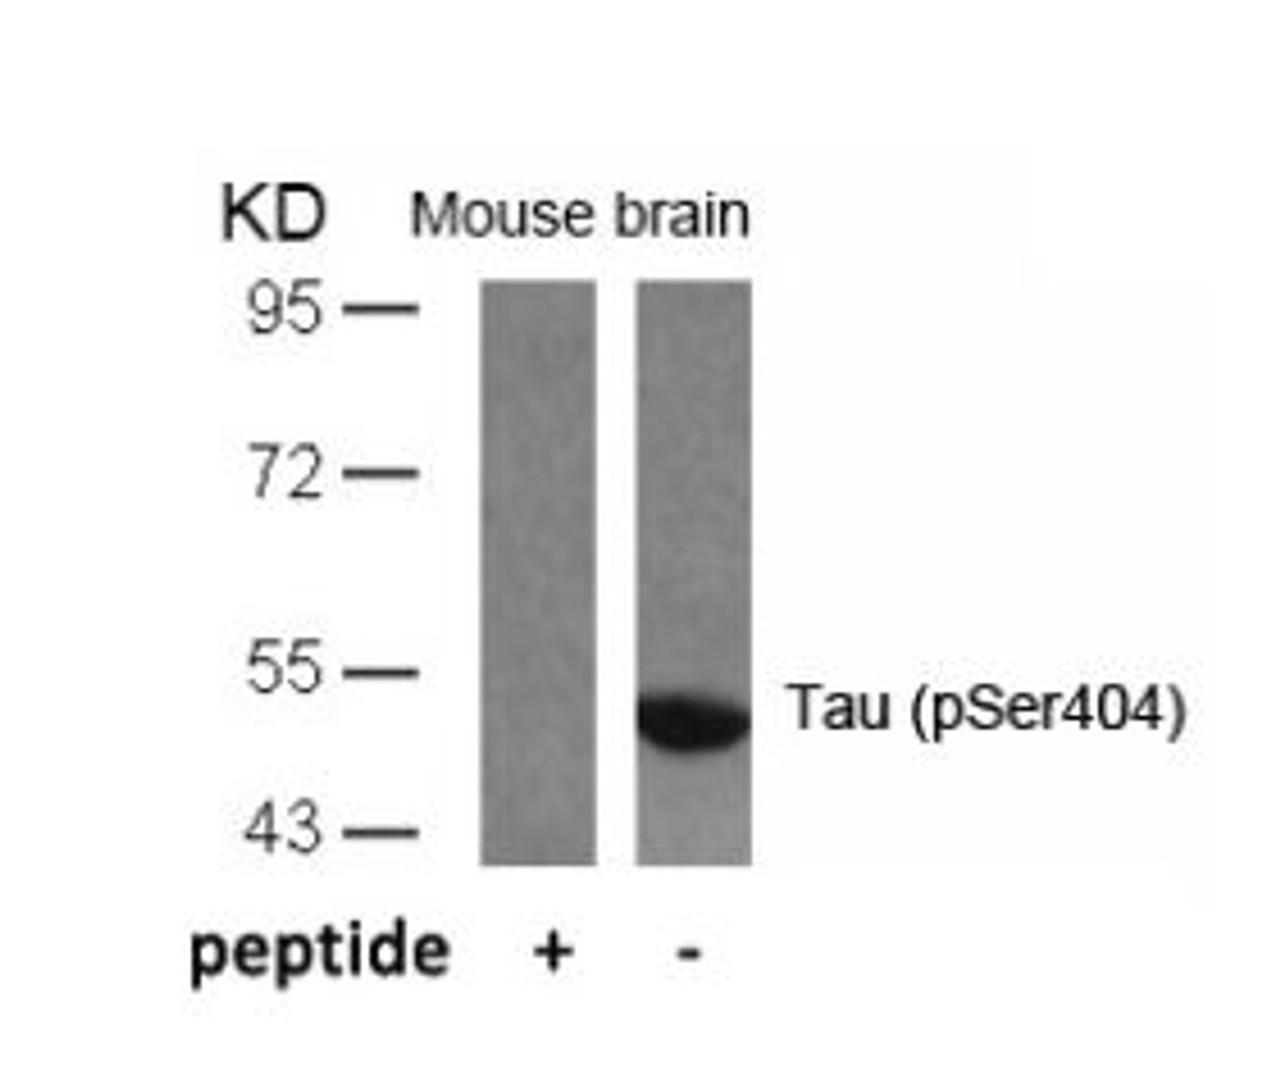 Western blot analysis of lysed extracts from mouse brain tissue using Tau (Phospho-Ser404) .